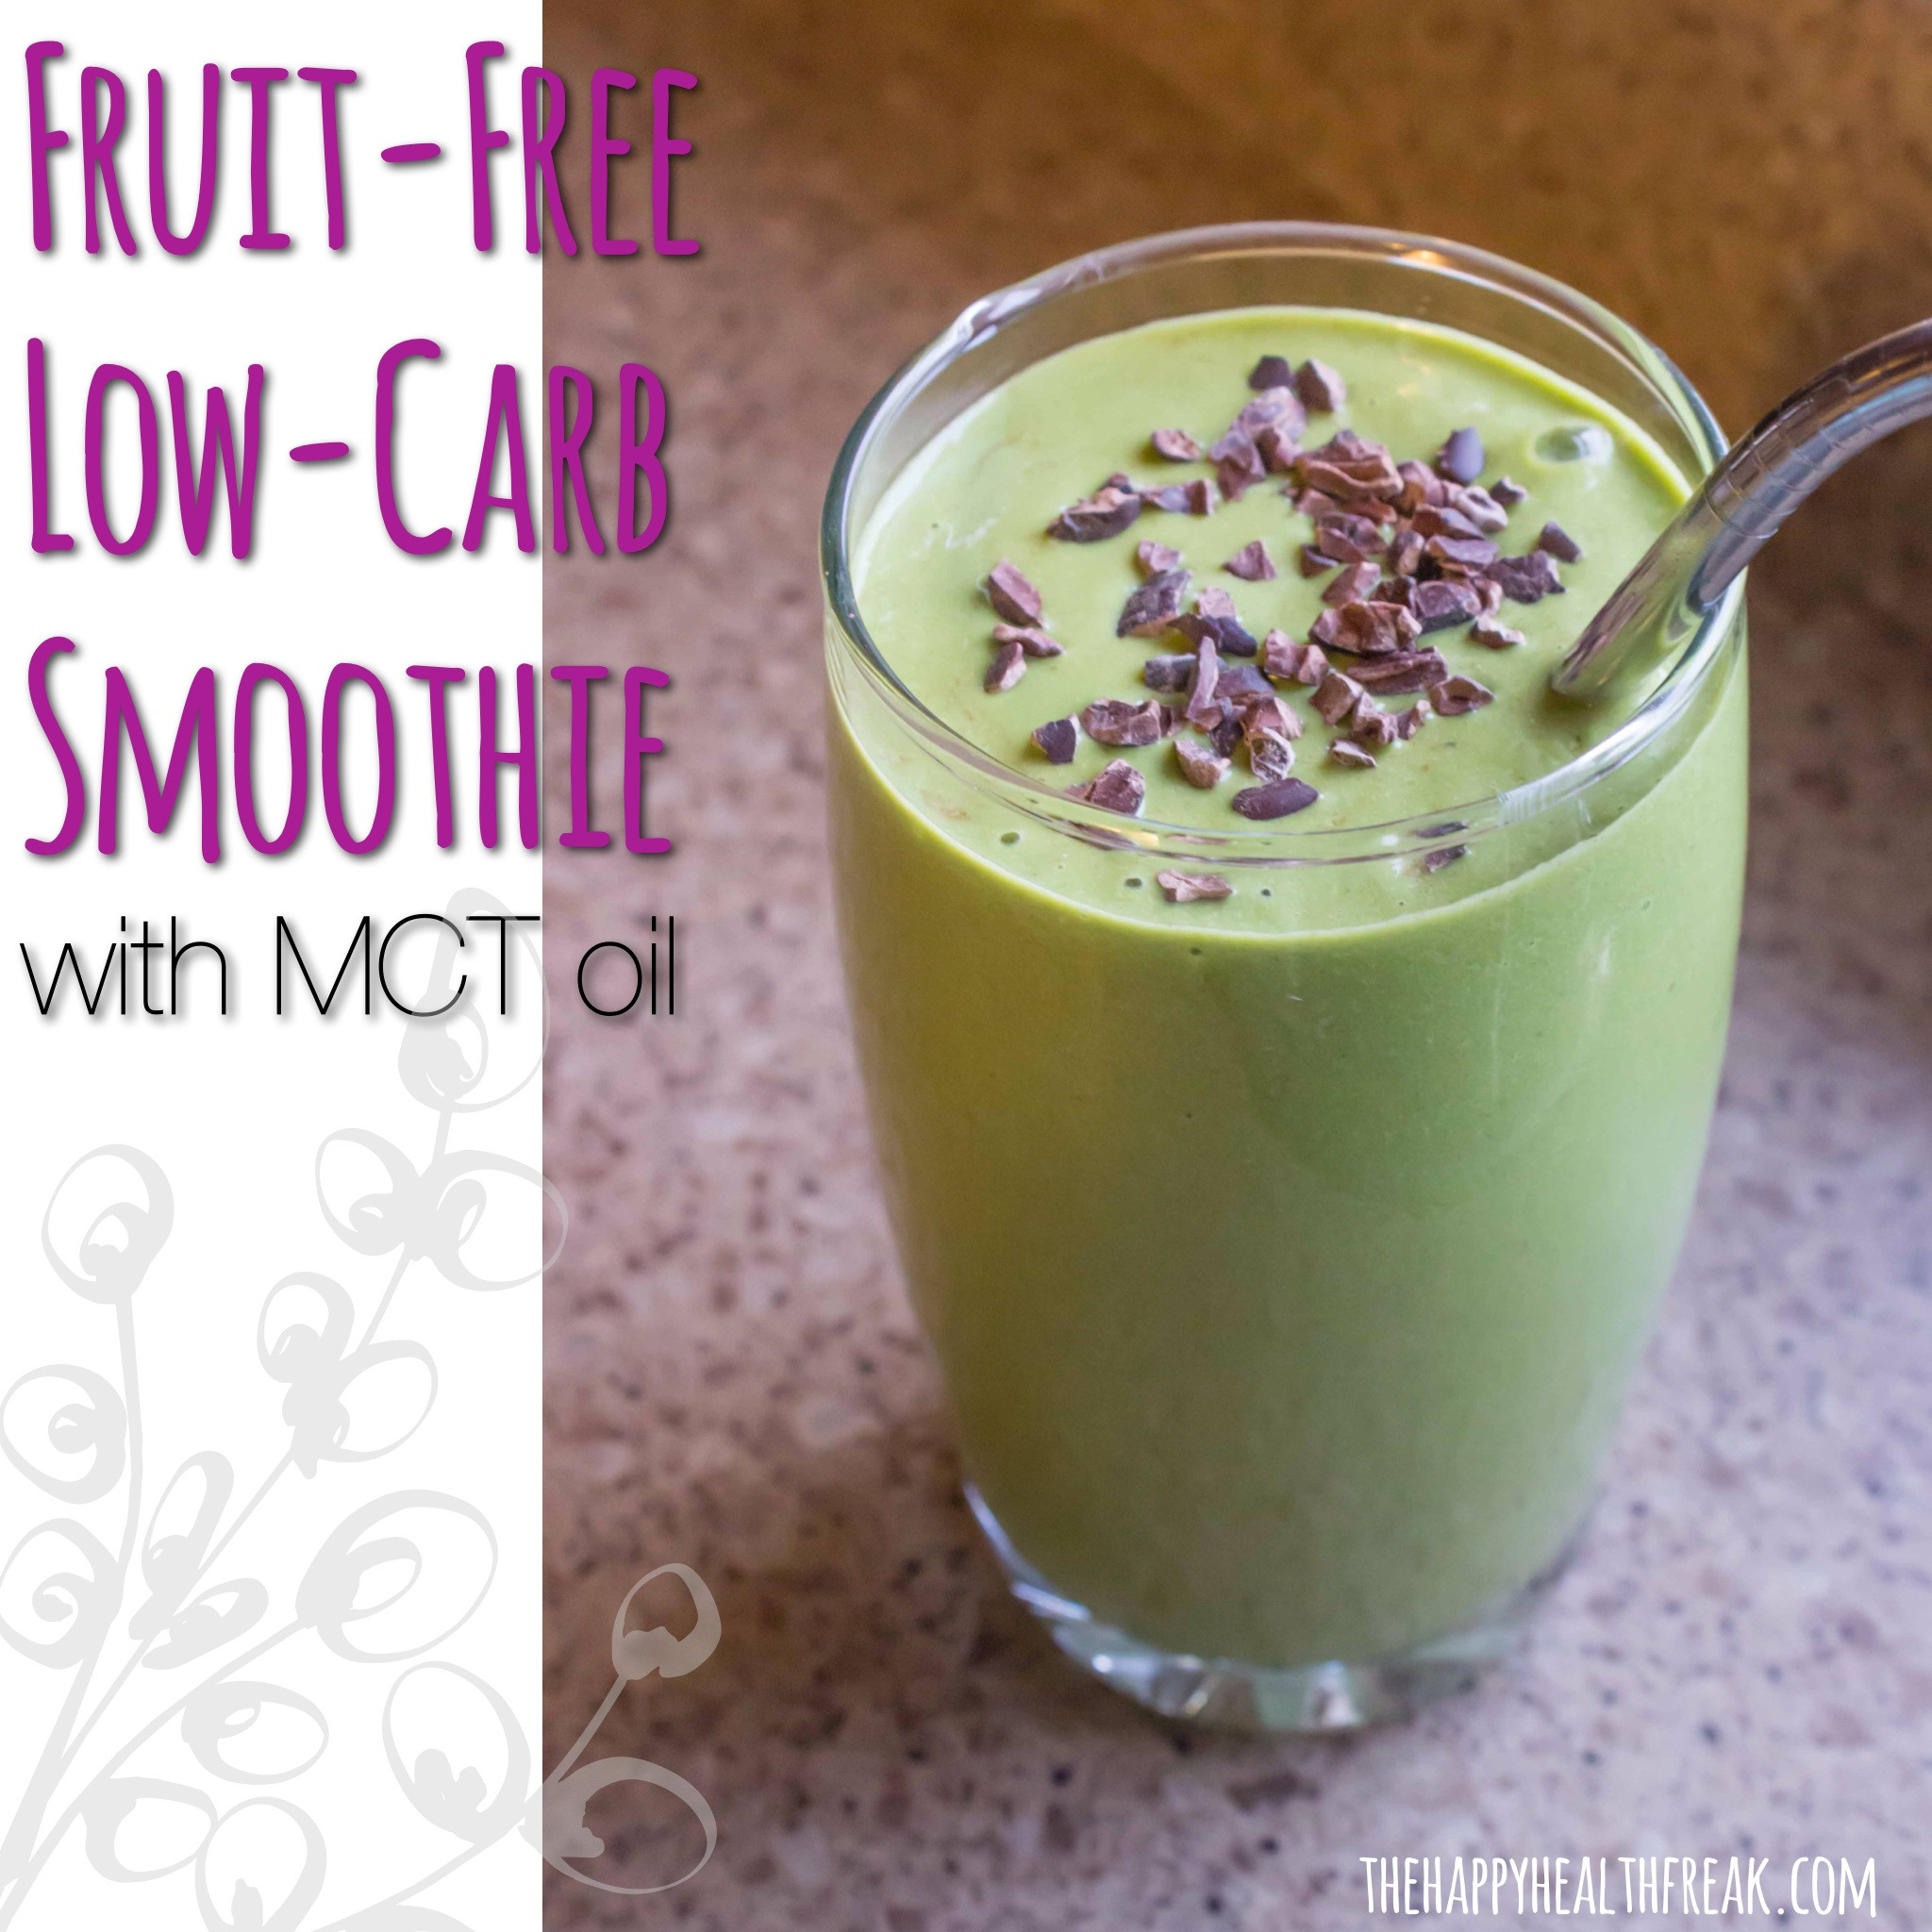 Healthy Low Carb Smoothies
 What is MCT Oil Plus Fruit Free Low Carb Smoothie The